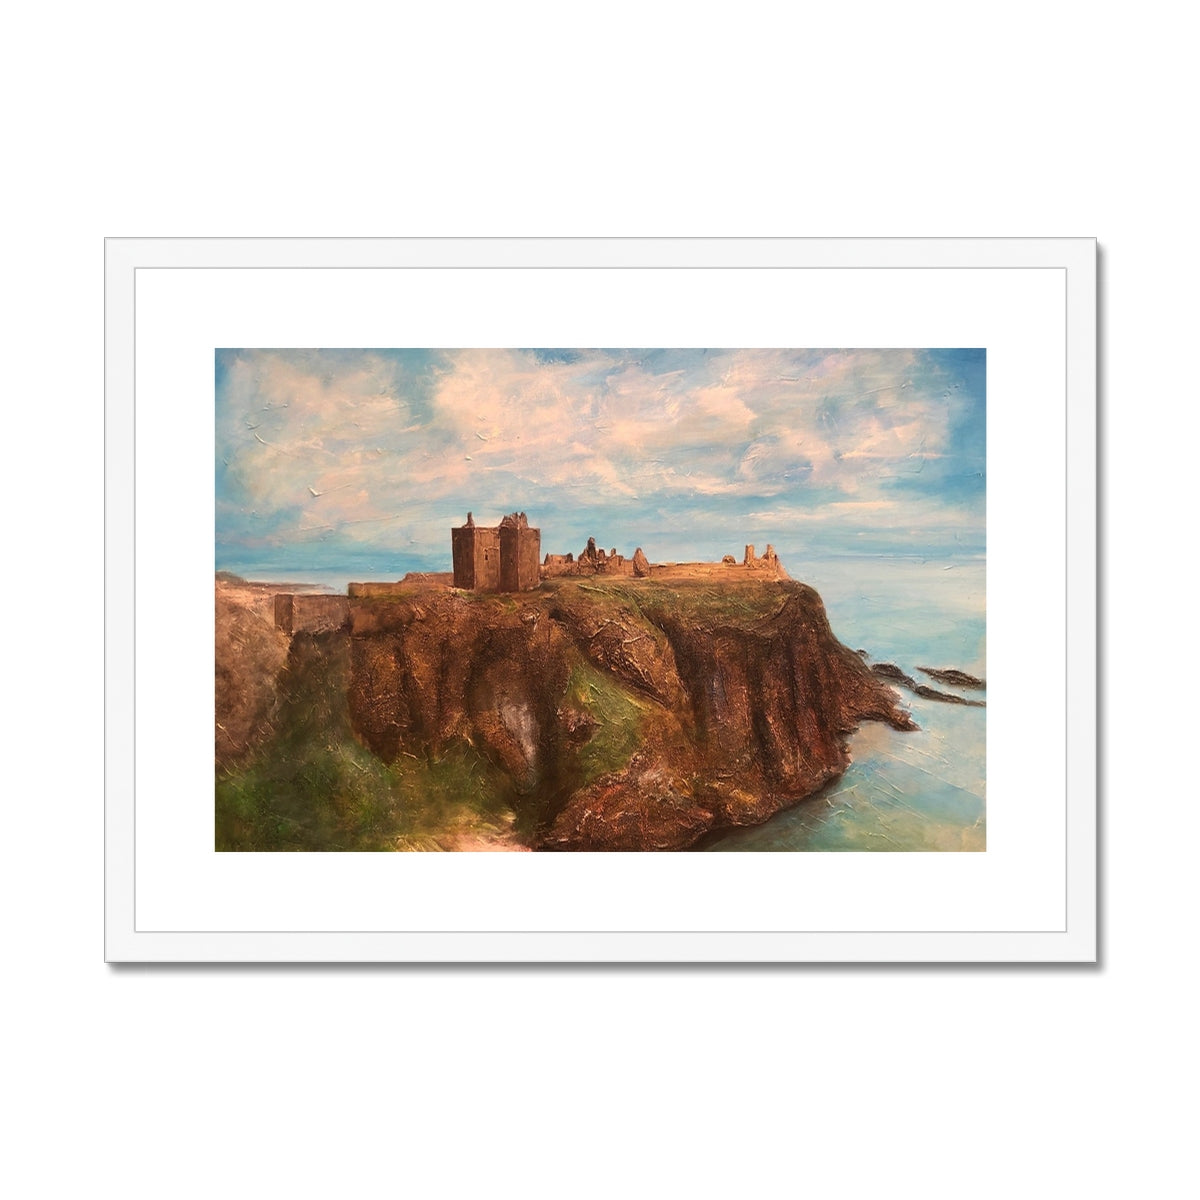 Dunnottar Castle Painting | Framed & Mounted Prints From Scotland-Framed & Mounted Prints-Historic & Iconic Scotland Art Gallery-A2 Landscape-White Frame-Paintings, Prints, Homeware, Art Gifts From Scotland By Scottish Artist Kevin Hunter